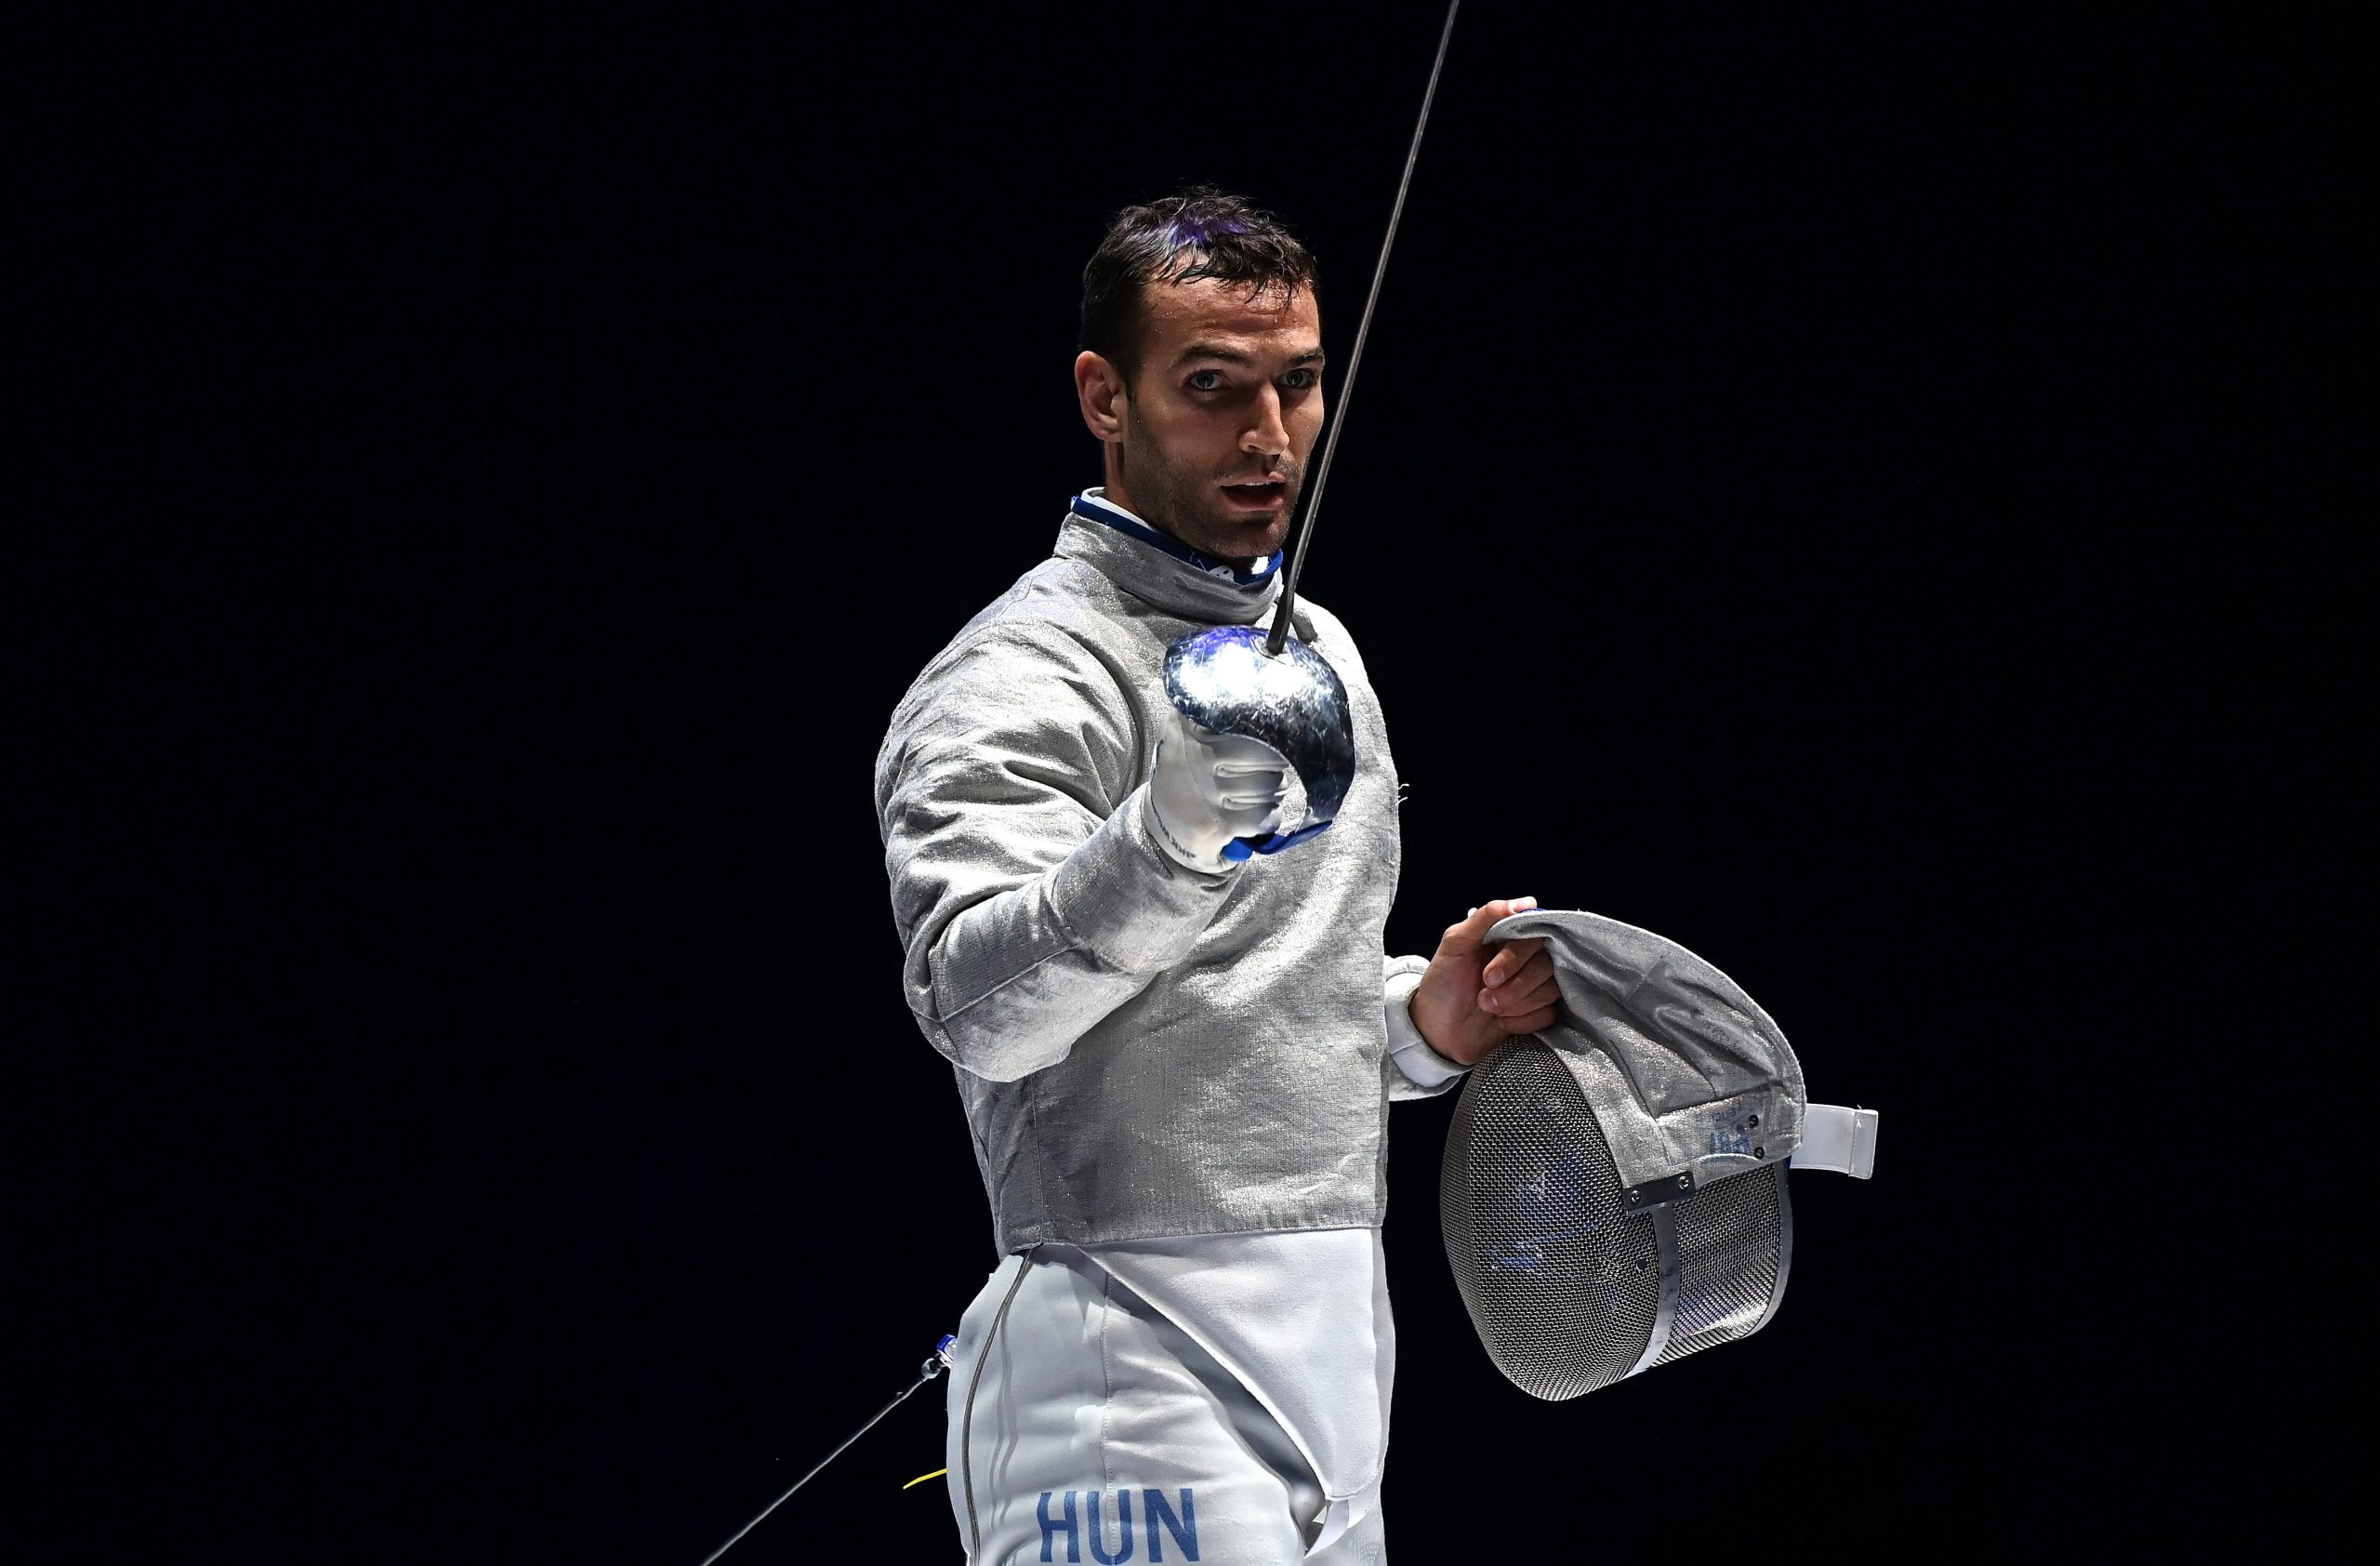 Hungarian Fencing Champion Aron Szilagyi Ready For Third Gold In Tokyo